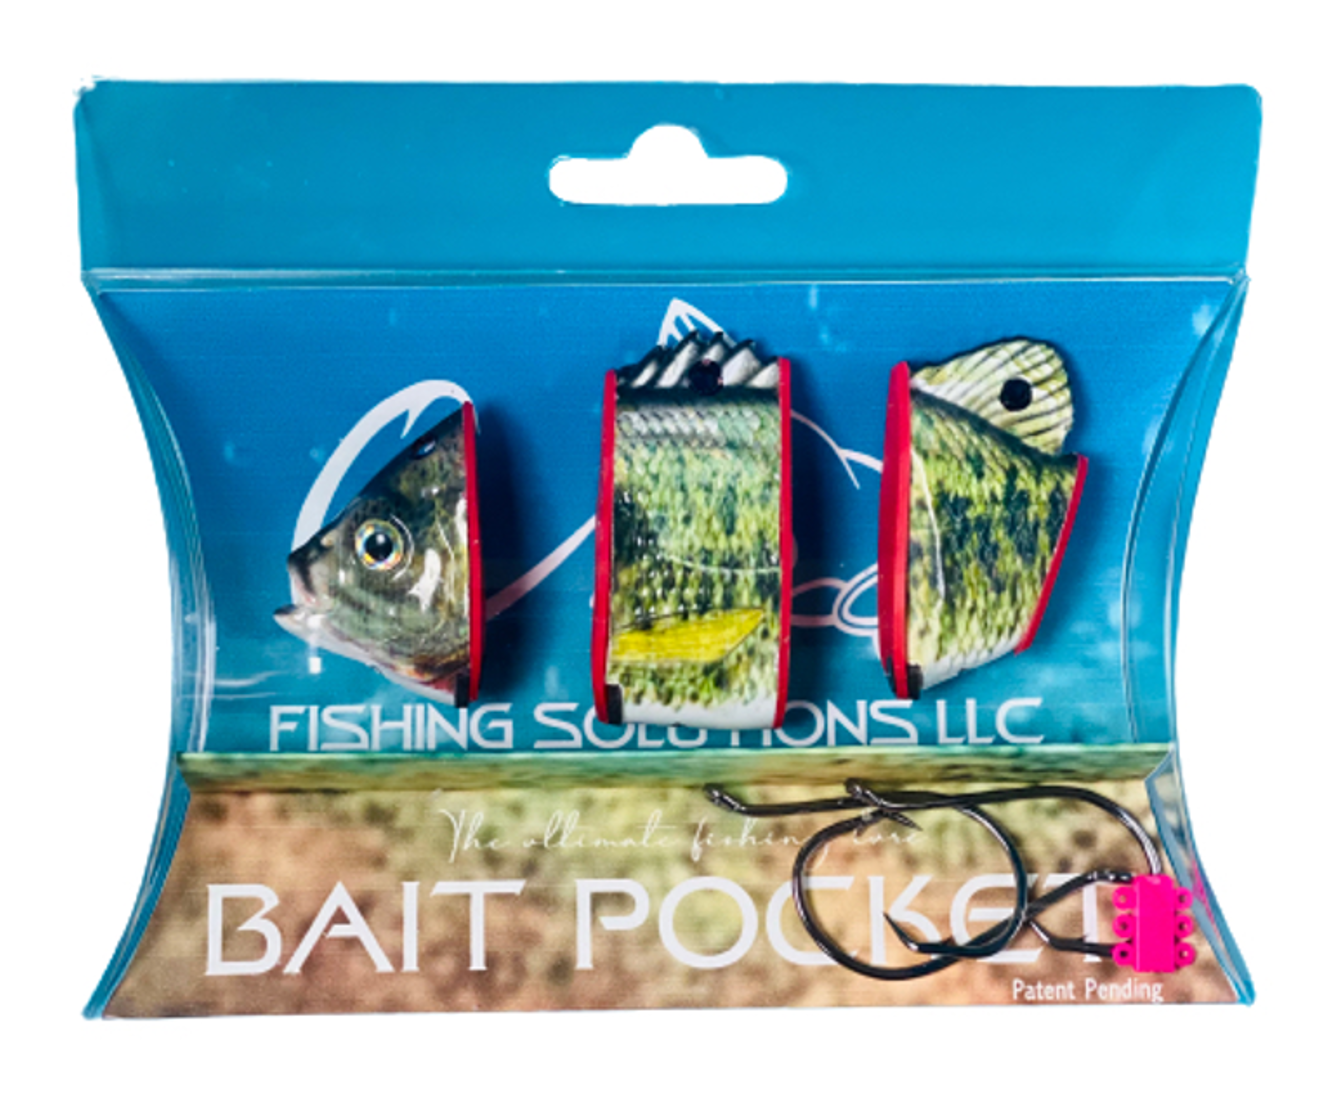 Fishing Solutions A patent-pending lure to hold manufactured bait that  mirrors the aesthetics of baitfish. Includes 3 independent lures  representing a section of baitfish, 3 high-carbon steel 5/0 circle hooks,  and 6